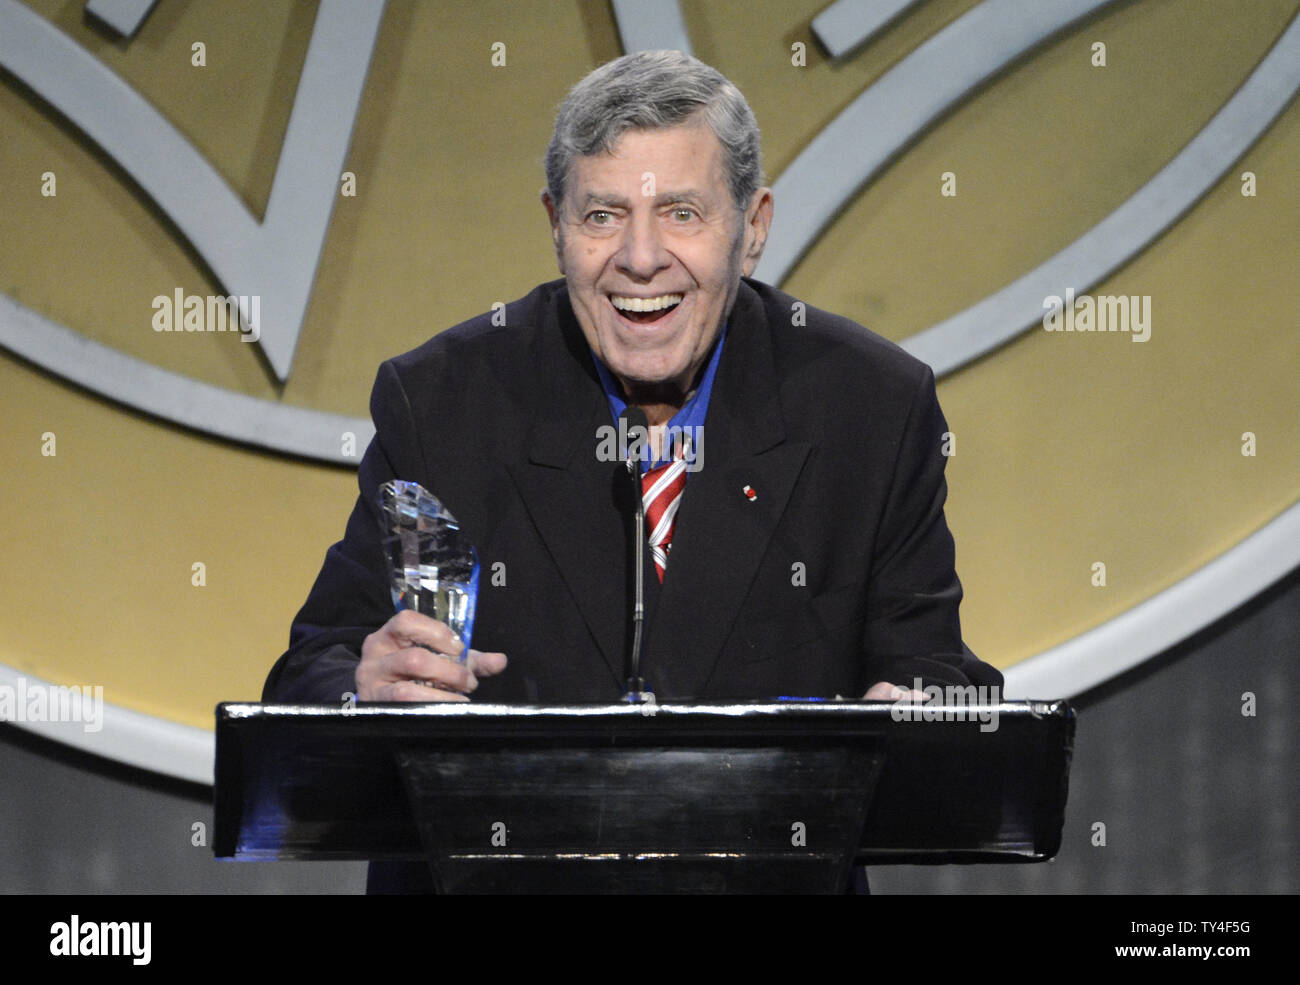 Jerry Lewis accepts the Lifetime Achievement award at the 51st Annual Publicists Awards Luncheon held at the Beverly Wilshire Hotel in Beverly Hills, California on February 28, 2014.      UPI/Phil McCarten Stock Photo